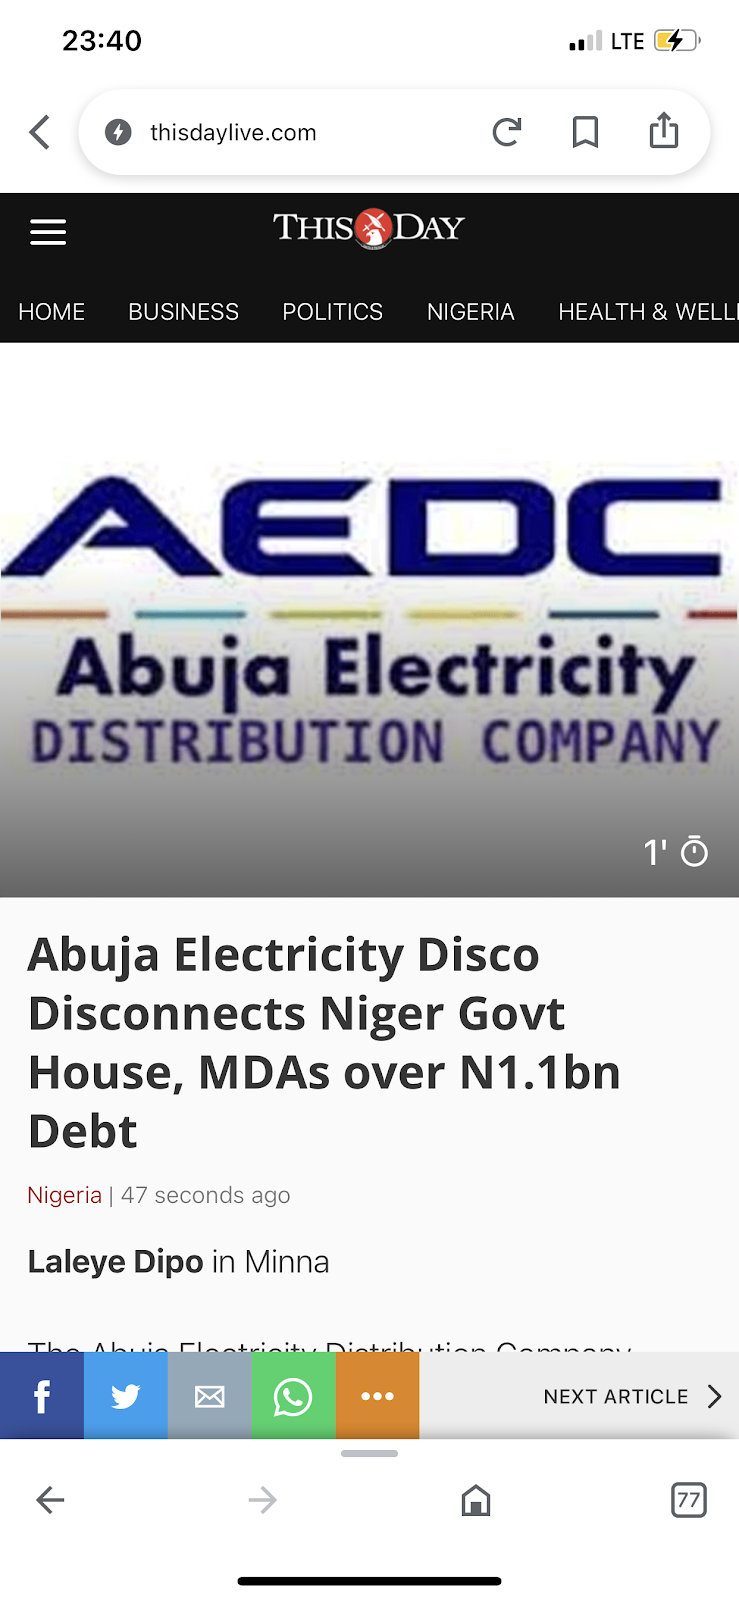 Abuja Electricity Distribution Company Did Not Disconnect Power Supply in Niger State